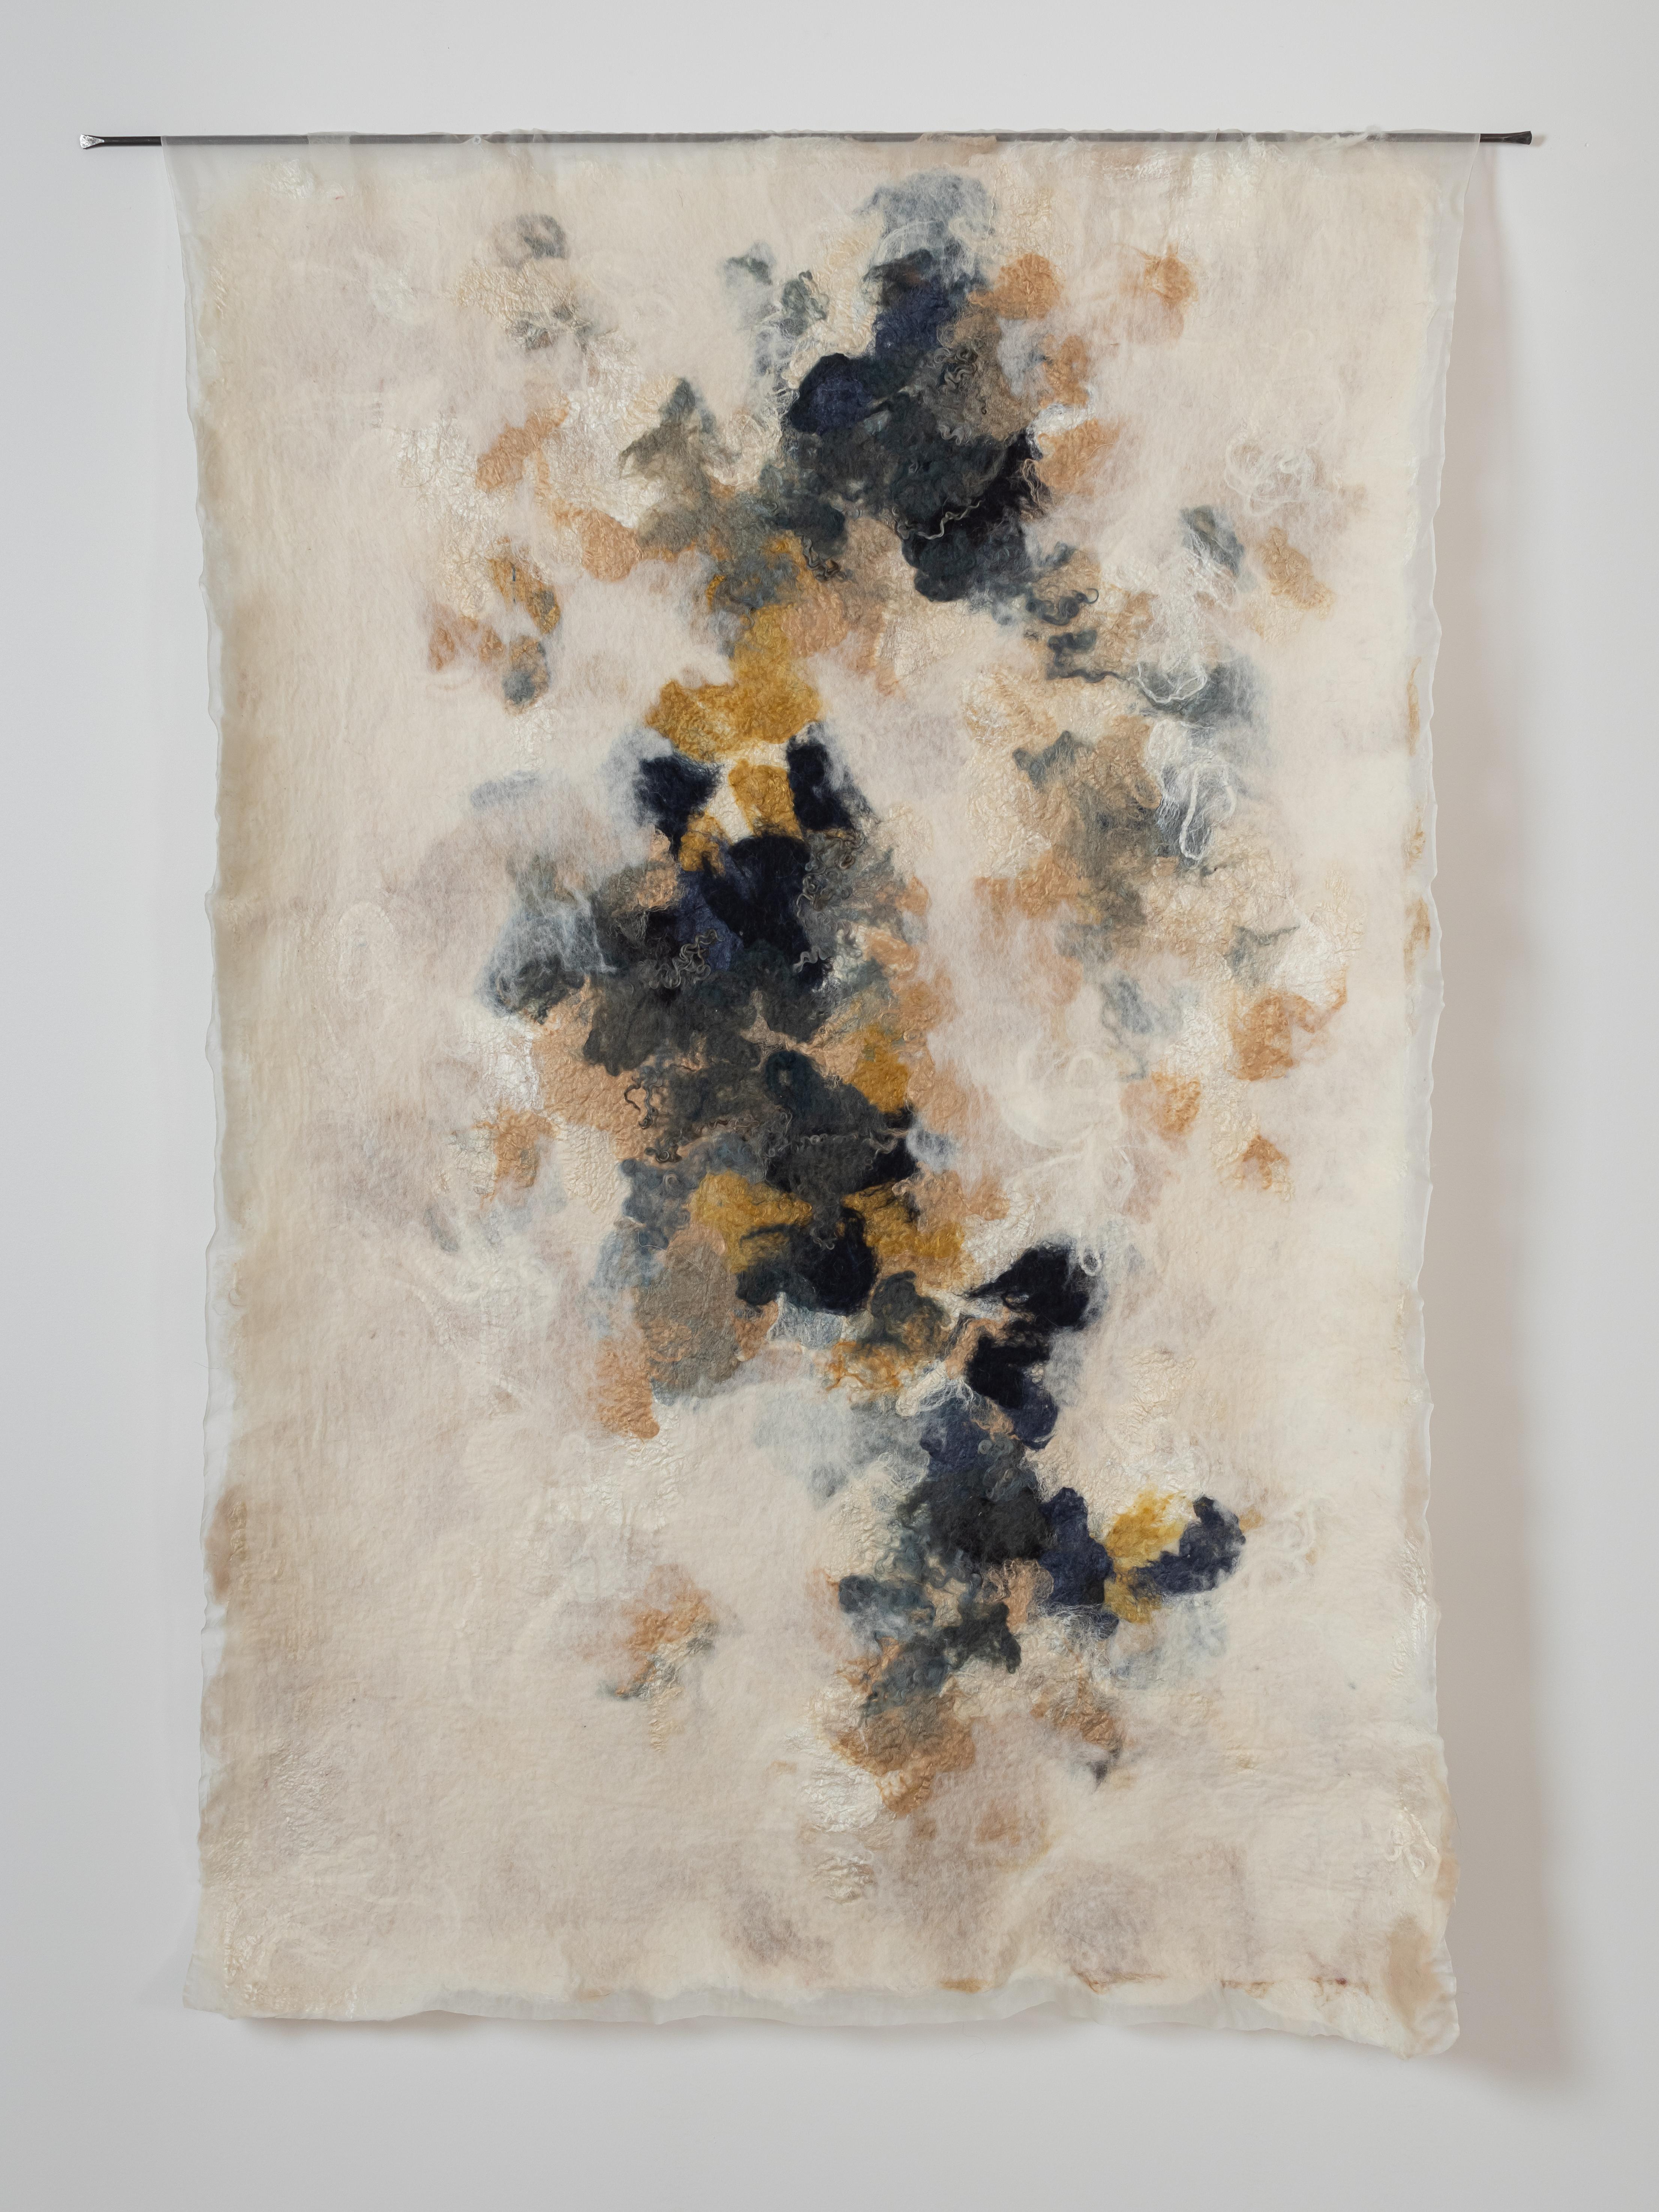 East Meets West, A Breath of Indigo Tapestry by Claudy Jongstra
Dimensions: W 105 x H 170 cm. 
Materials: Drenth heath and merino wool, silk, silk organza and mohair.

Claudy Jongstra is known worldwide for her monumental artworks and